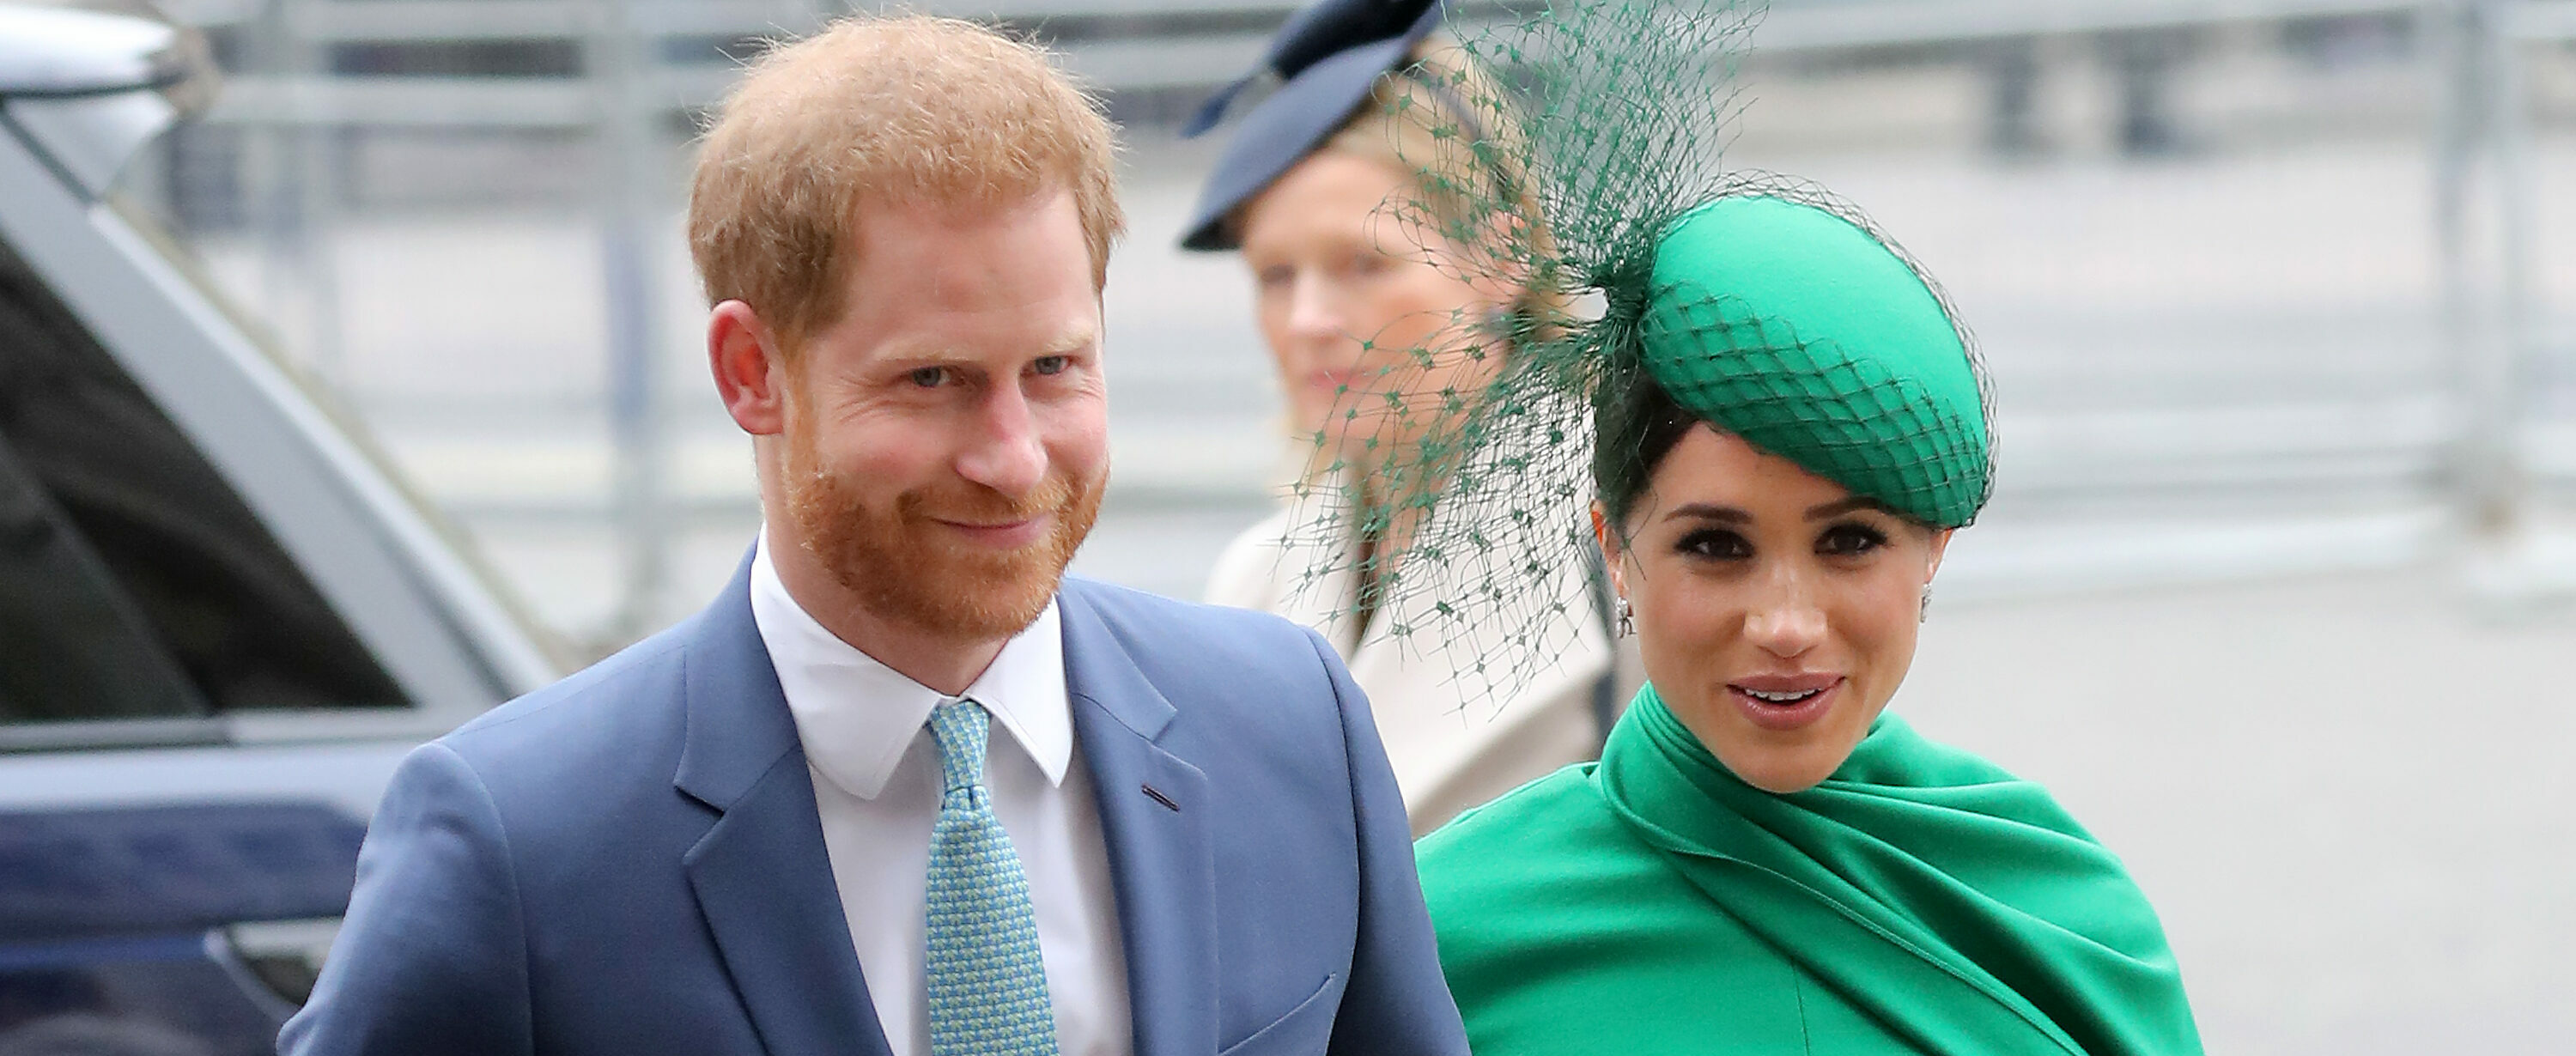 More engaging content surrounding Harry and Meghan is to come